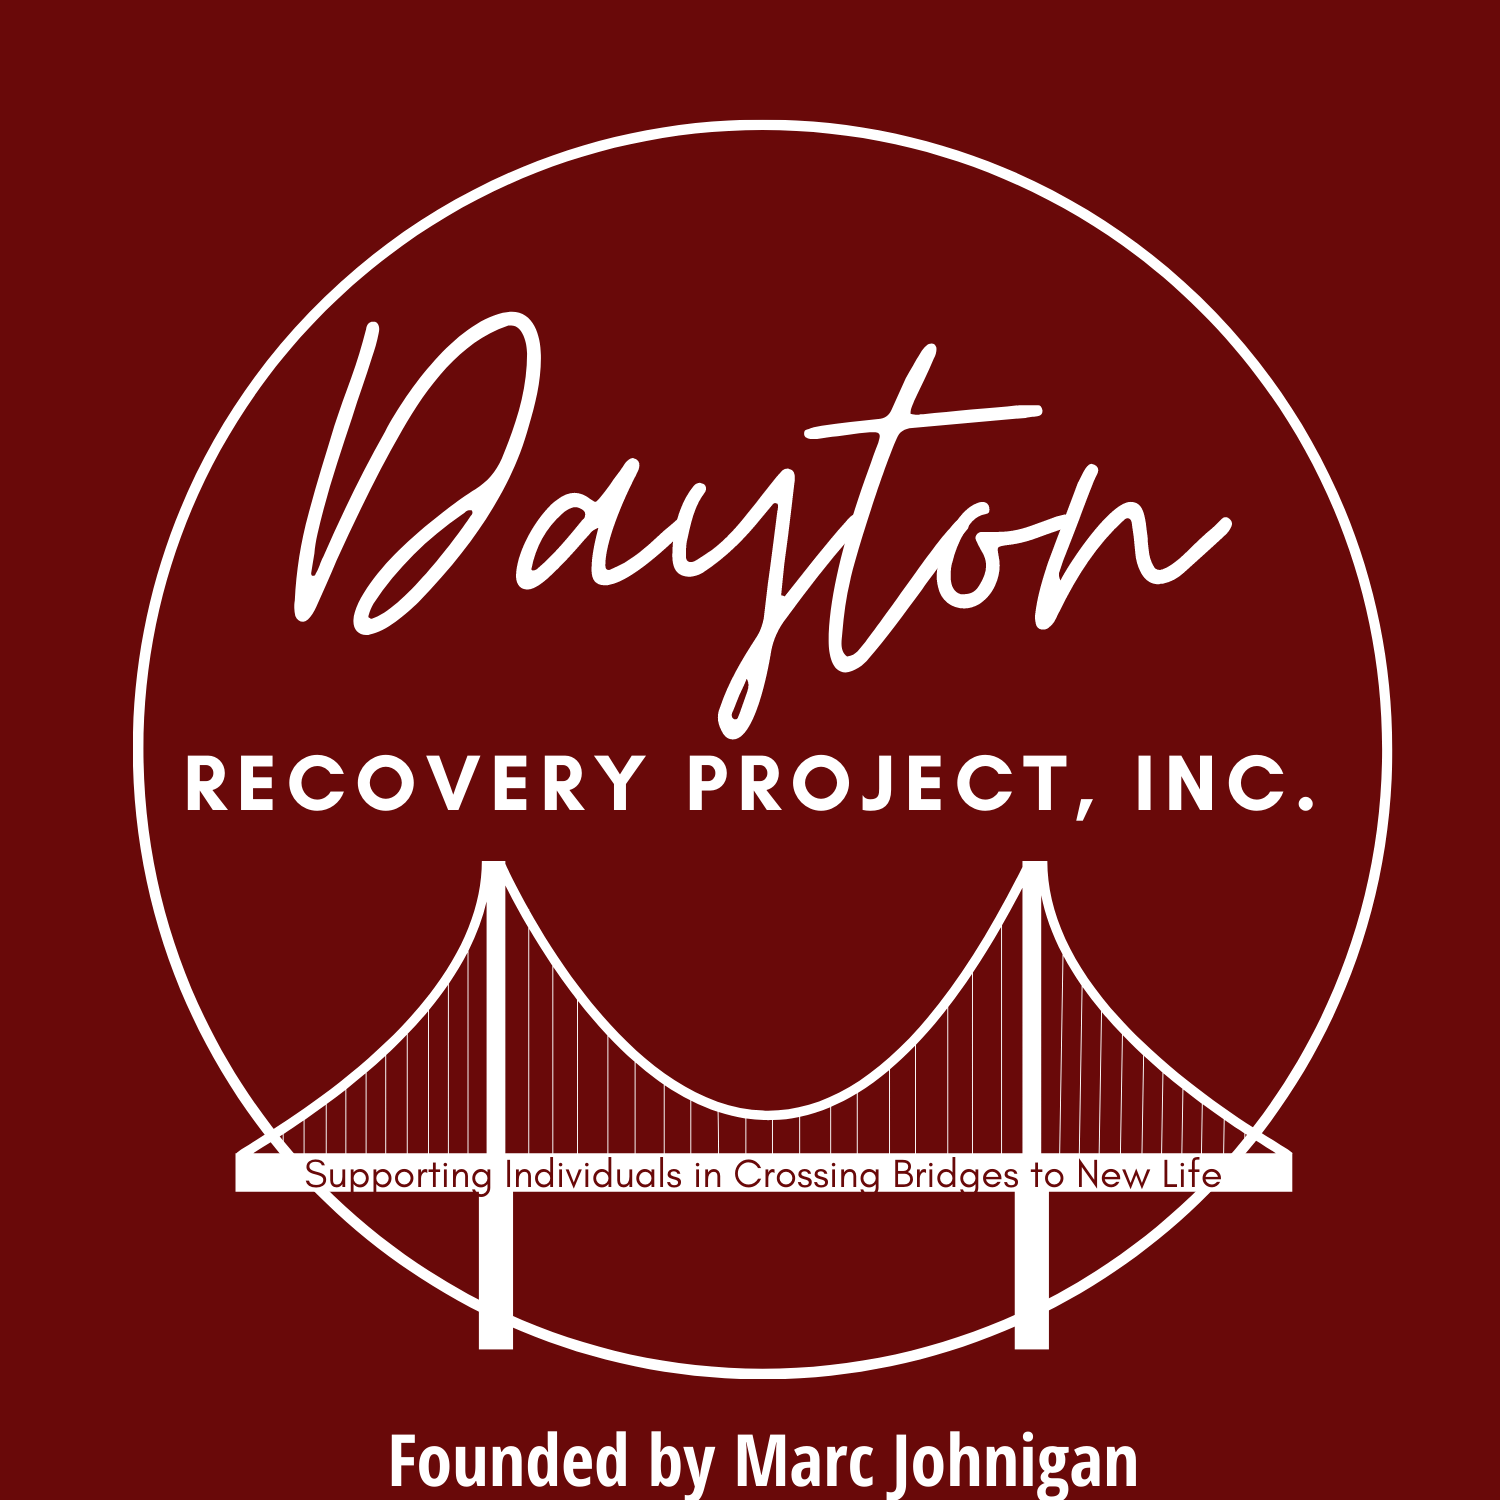 Dayton Recovery Project, Inc. Founded by Marc Johnigan